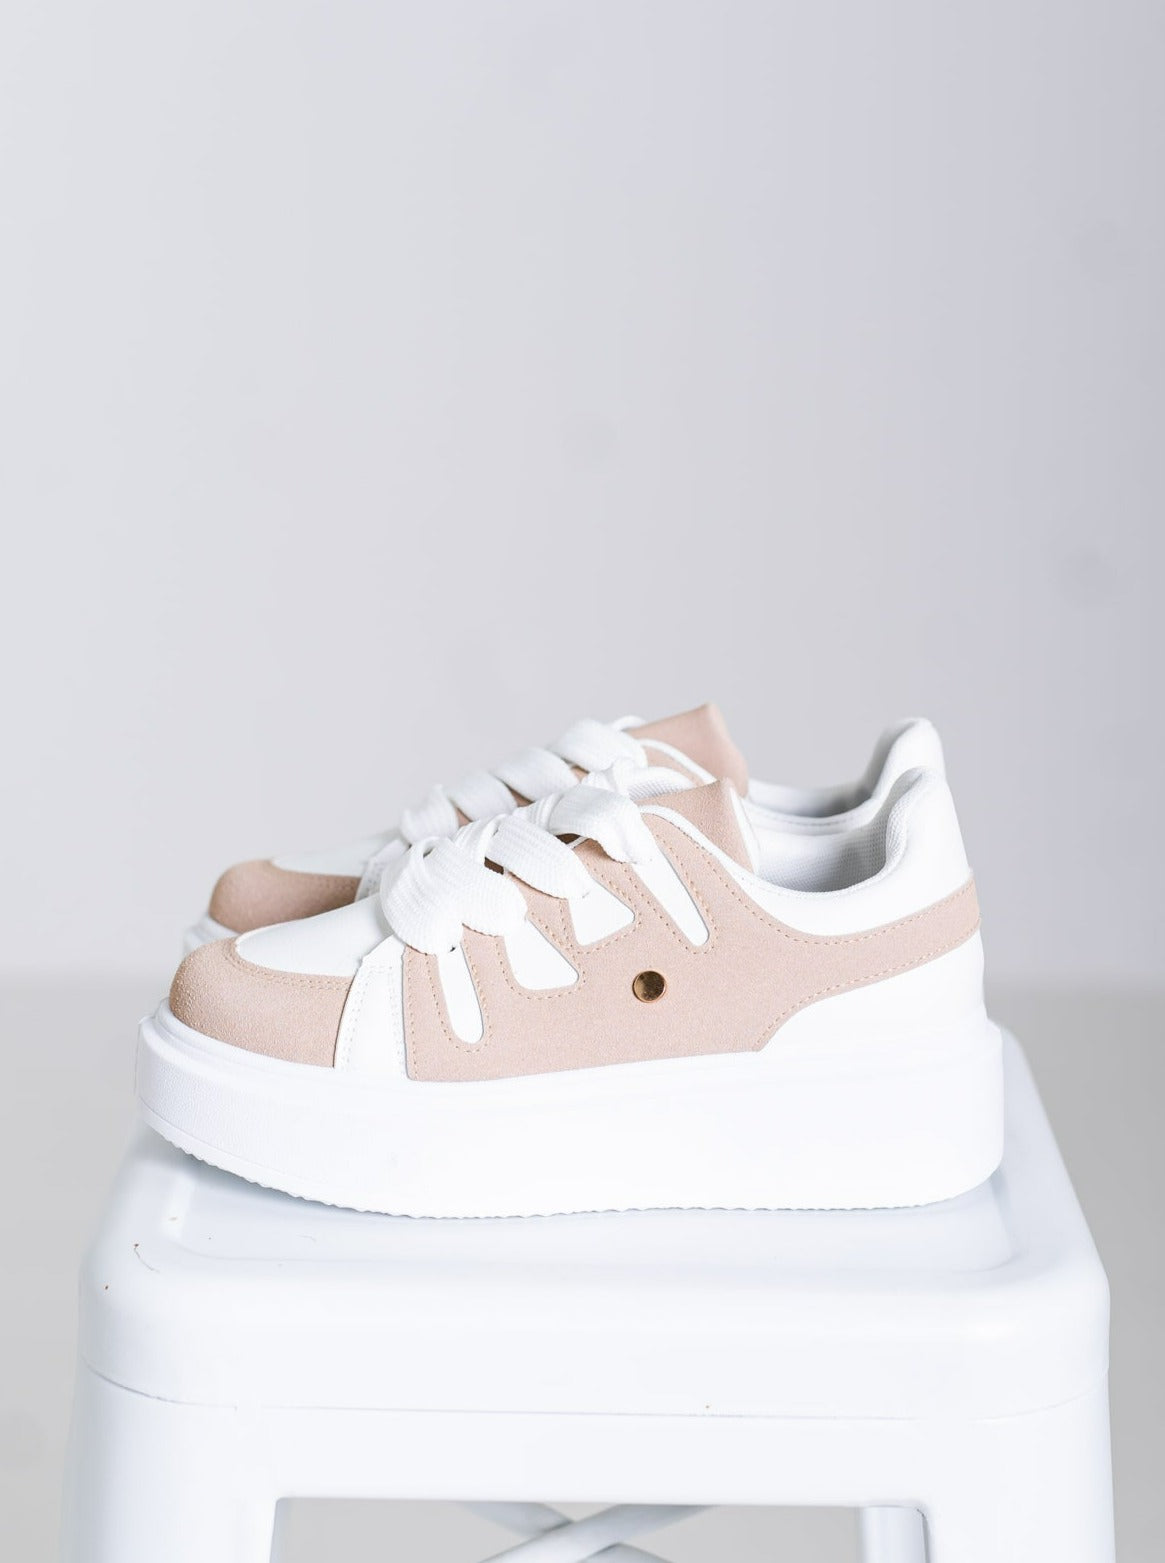 Go On Sneakers - Weiß/Taupe